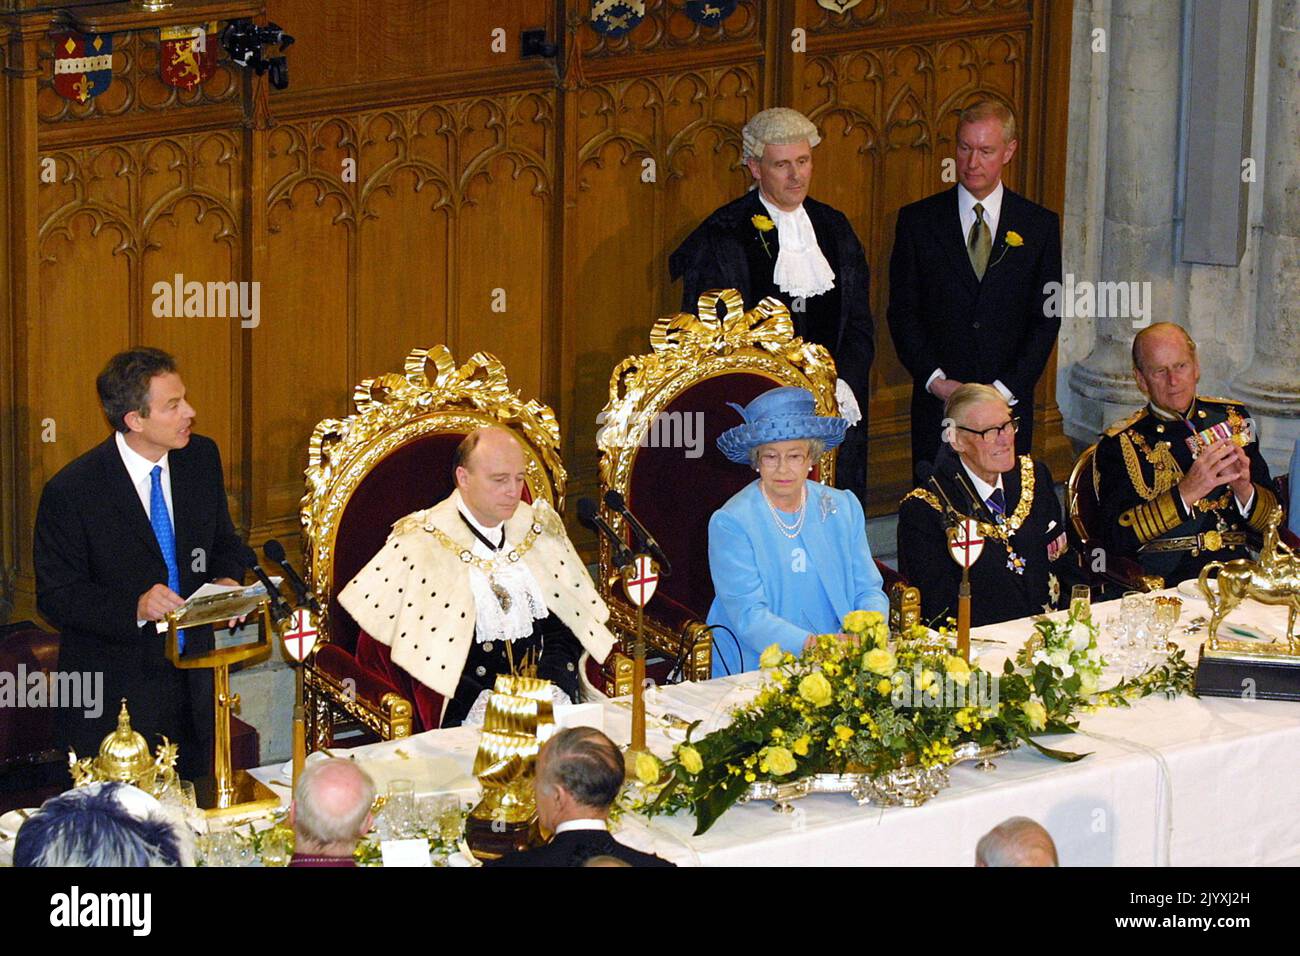 File photo dated 4/6/2002 of Prime Minister Tony Blair speaking during the festival banquet at the Guildhall in London to celebrate Queen Elizabeth II's Golden Jubilee. The Queen toured the UK during her Golden Jubilee year – but 2002 also saw the death of both her sister and her mother. Doubters had insisted the Golden Jubilee would be a flop – the monarchy was no longer relevant and royalists should at last bow to the republicans, they argued. More than one million people turned out on successive days during the June Bank Holiday weekend to party on the capital’s streets and in the regions,  Stock Photo